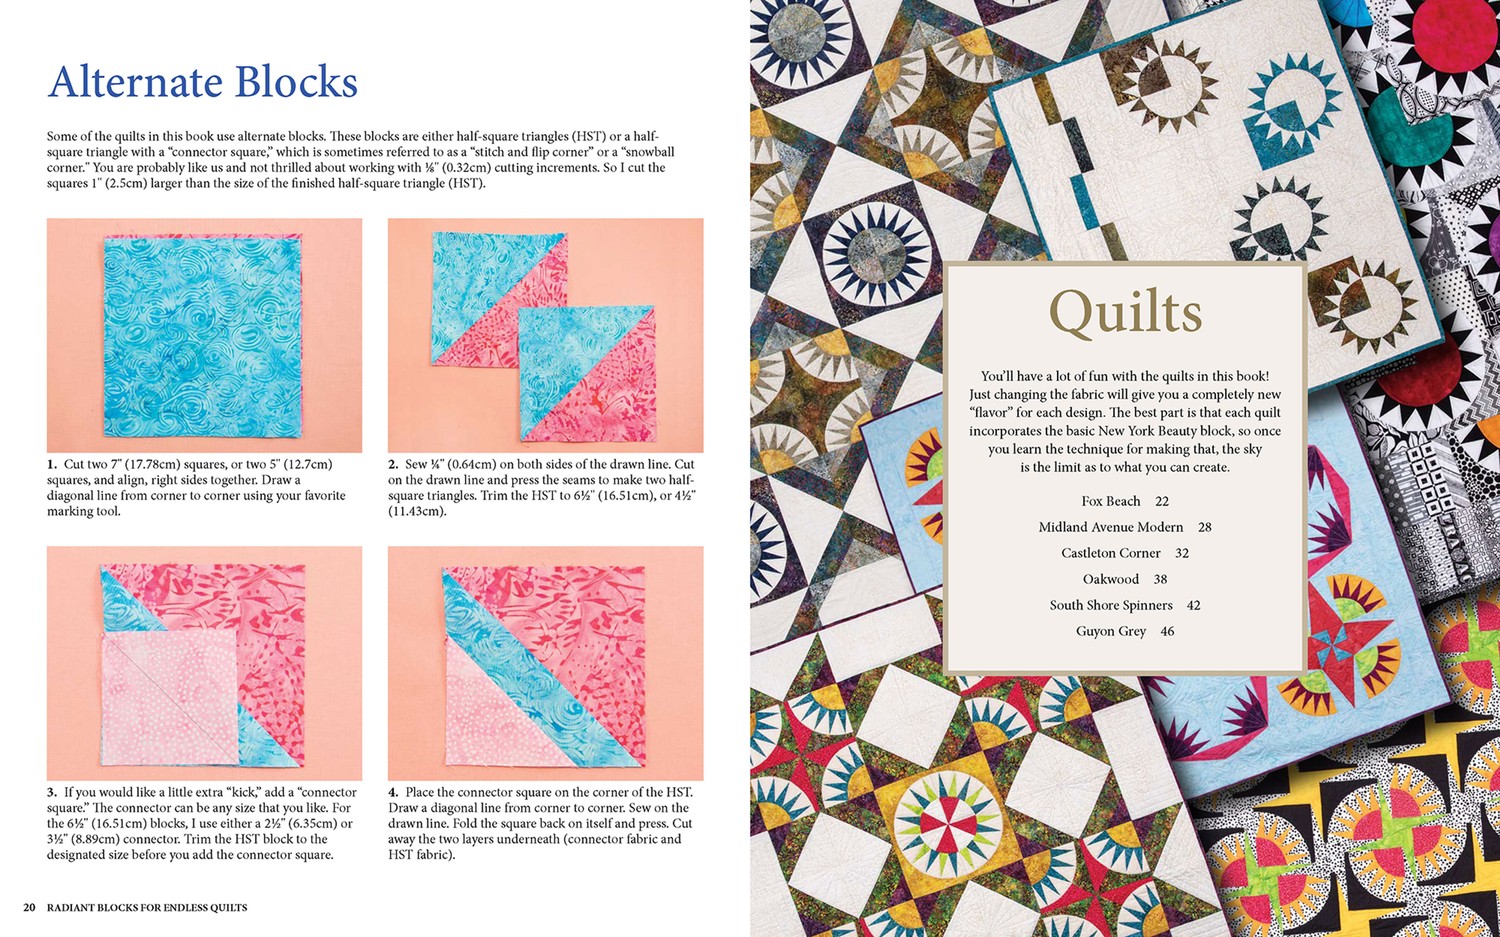 Radiant Blocks for Endless Quilts: Designing with New York Beauties [Book]